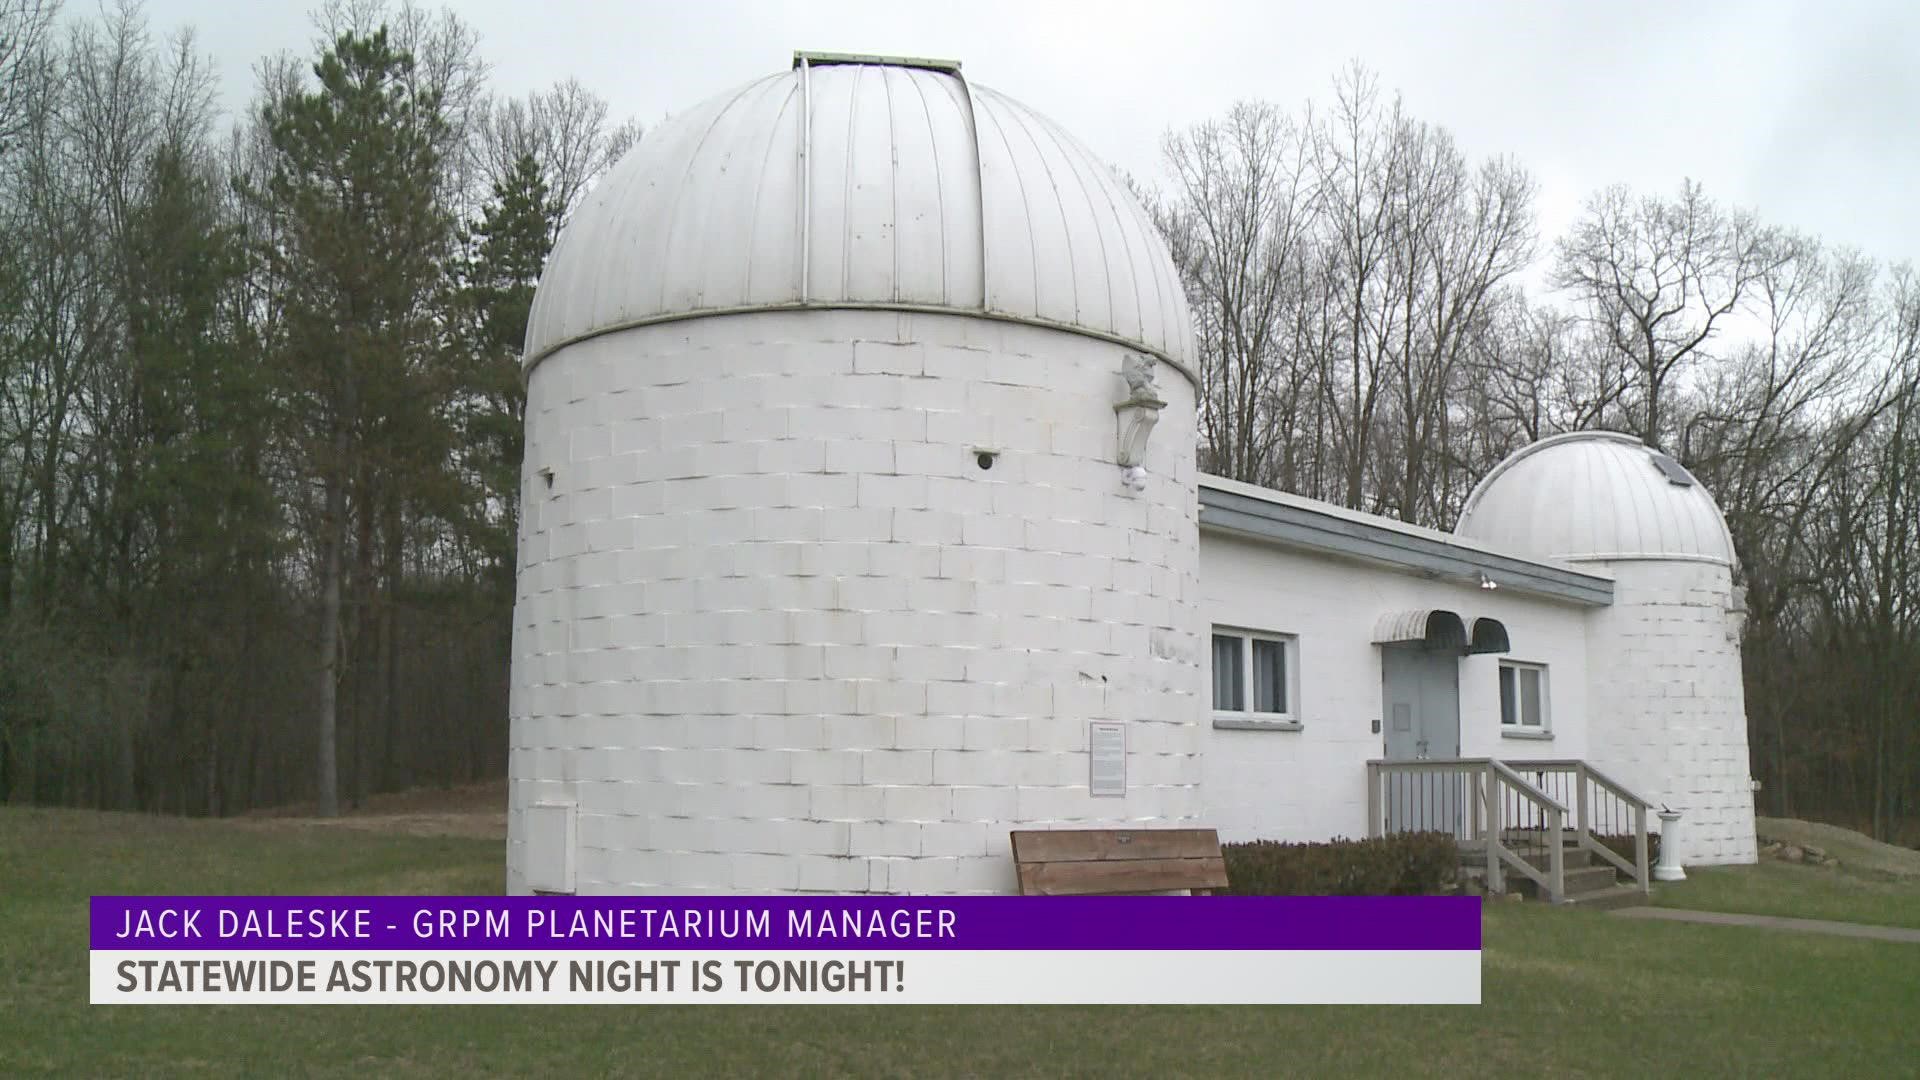 As part of the Michigan State University Science Festival, the Grand Rapids Public Museum and Veen Observatory are hosting an astronomy night Friday.